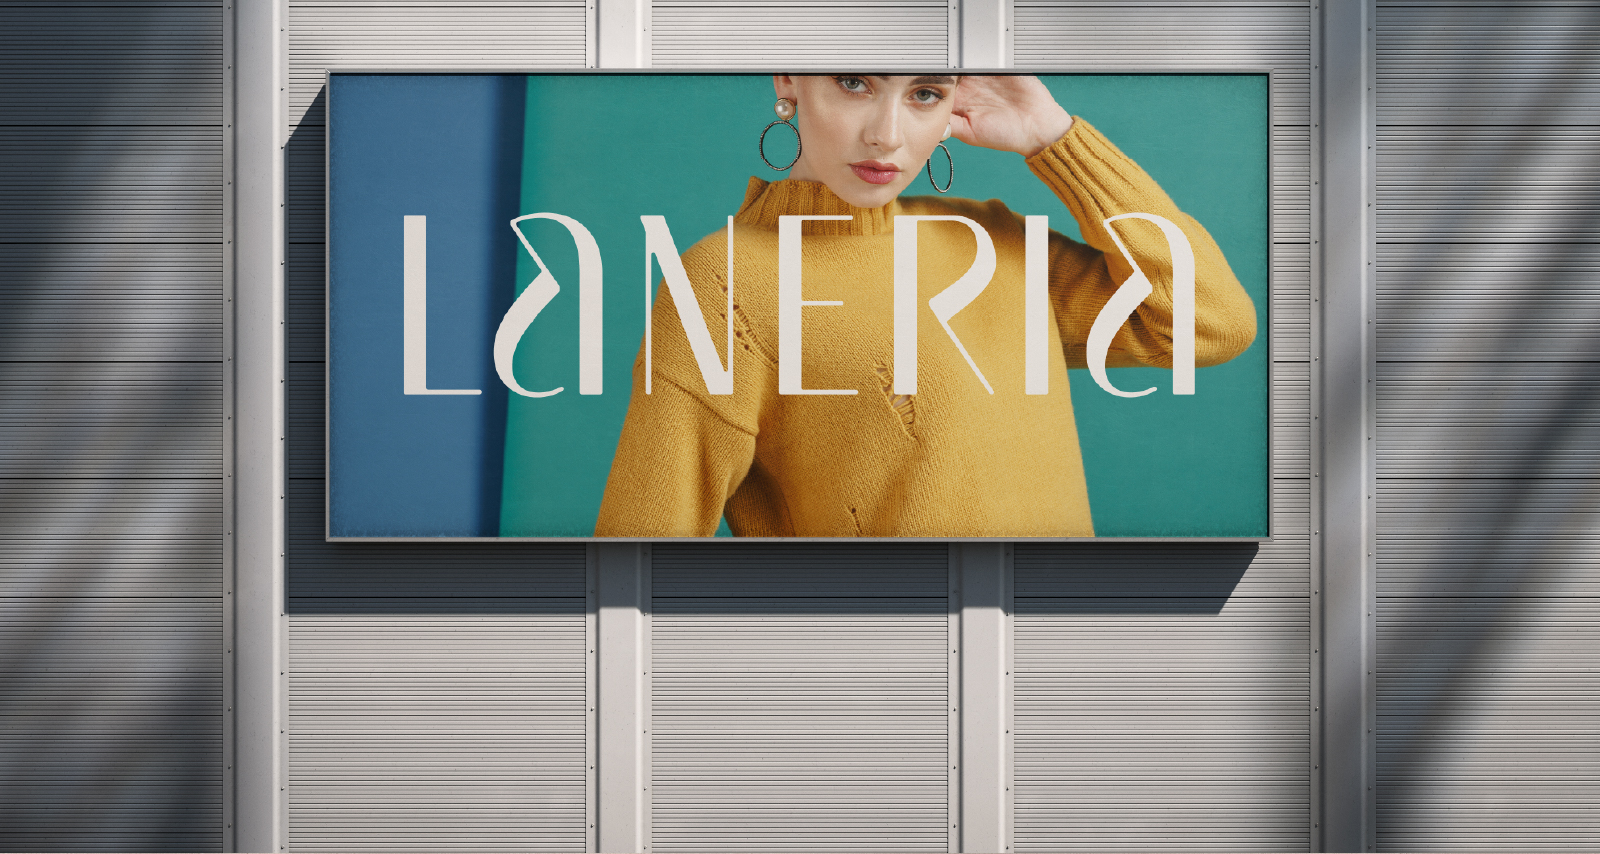 Laneria Brand Naming, Branding, Web Development, Marketing Strategy and Implementation Created by B1 Studio